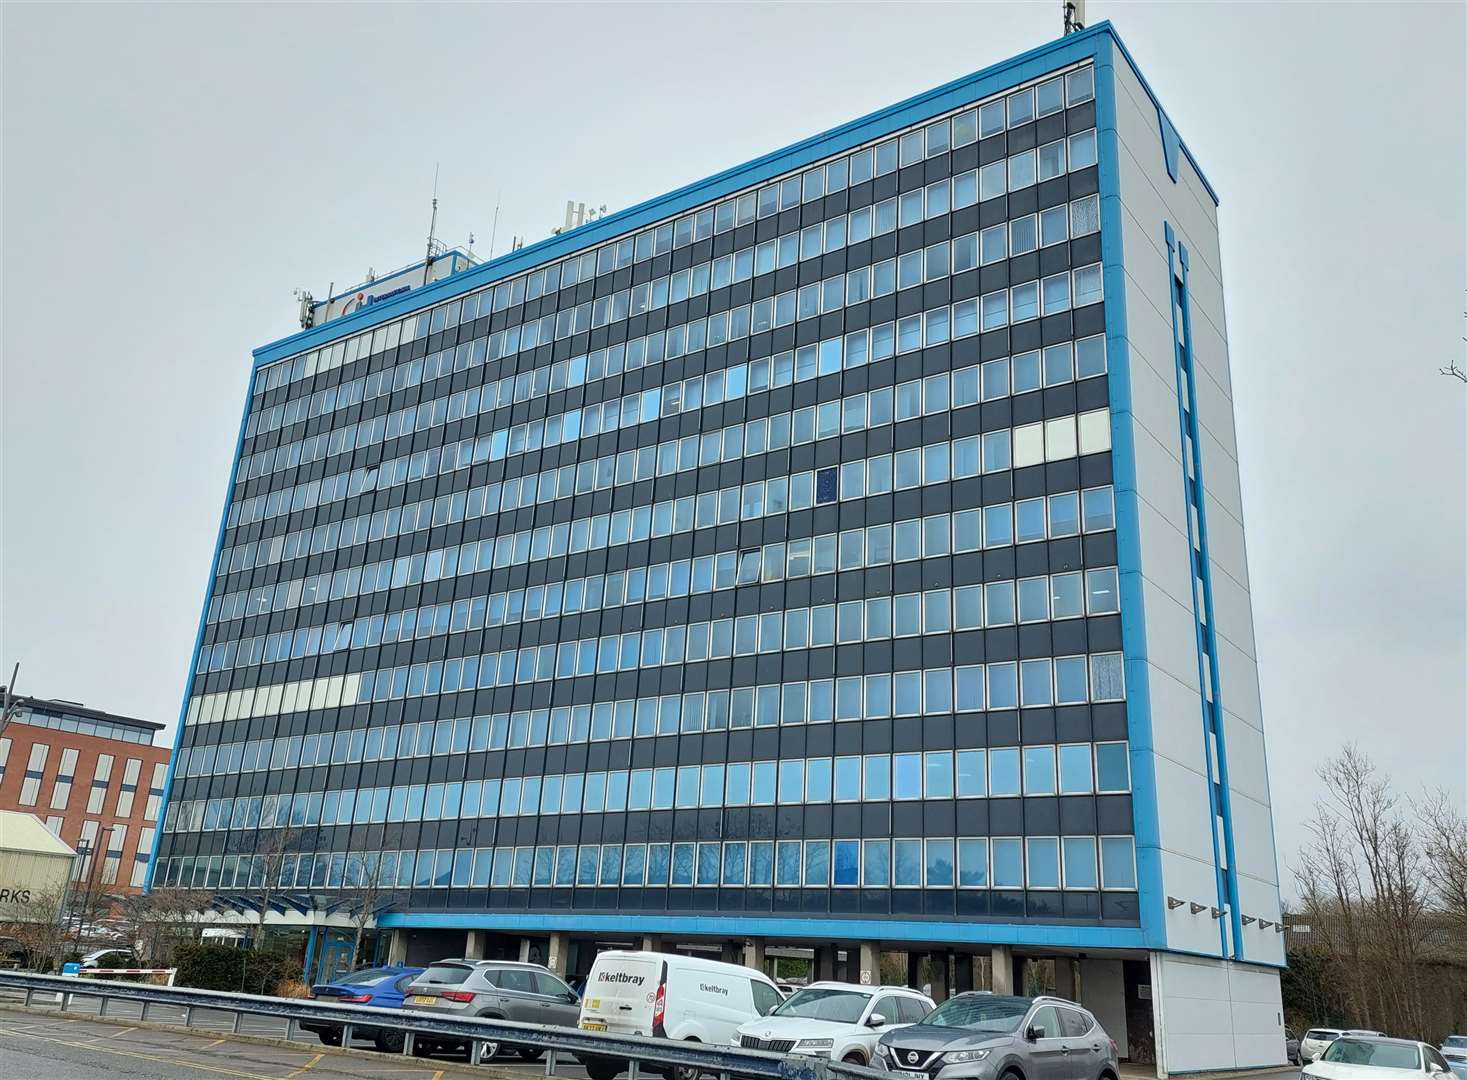 Ashford Borough Council is to consider relocating its headquarters to International House, Ashford, pictured here in March 2023